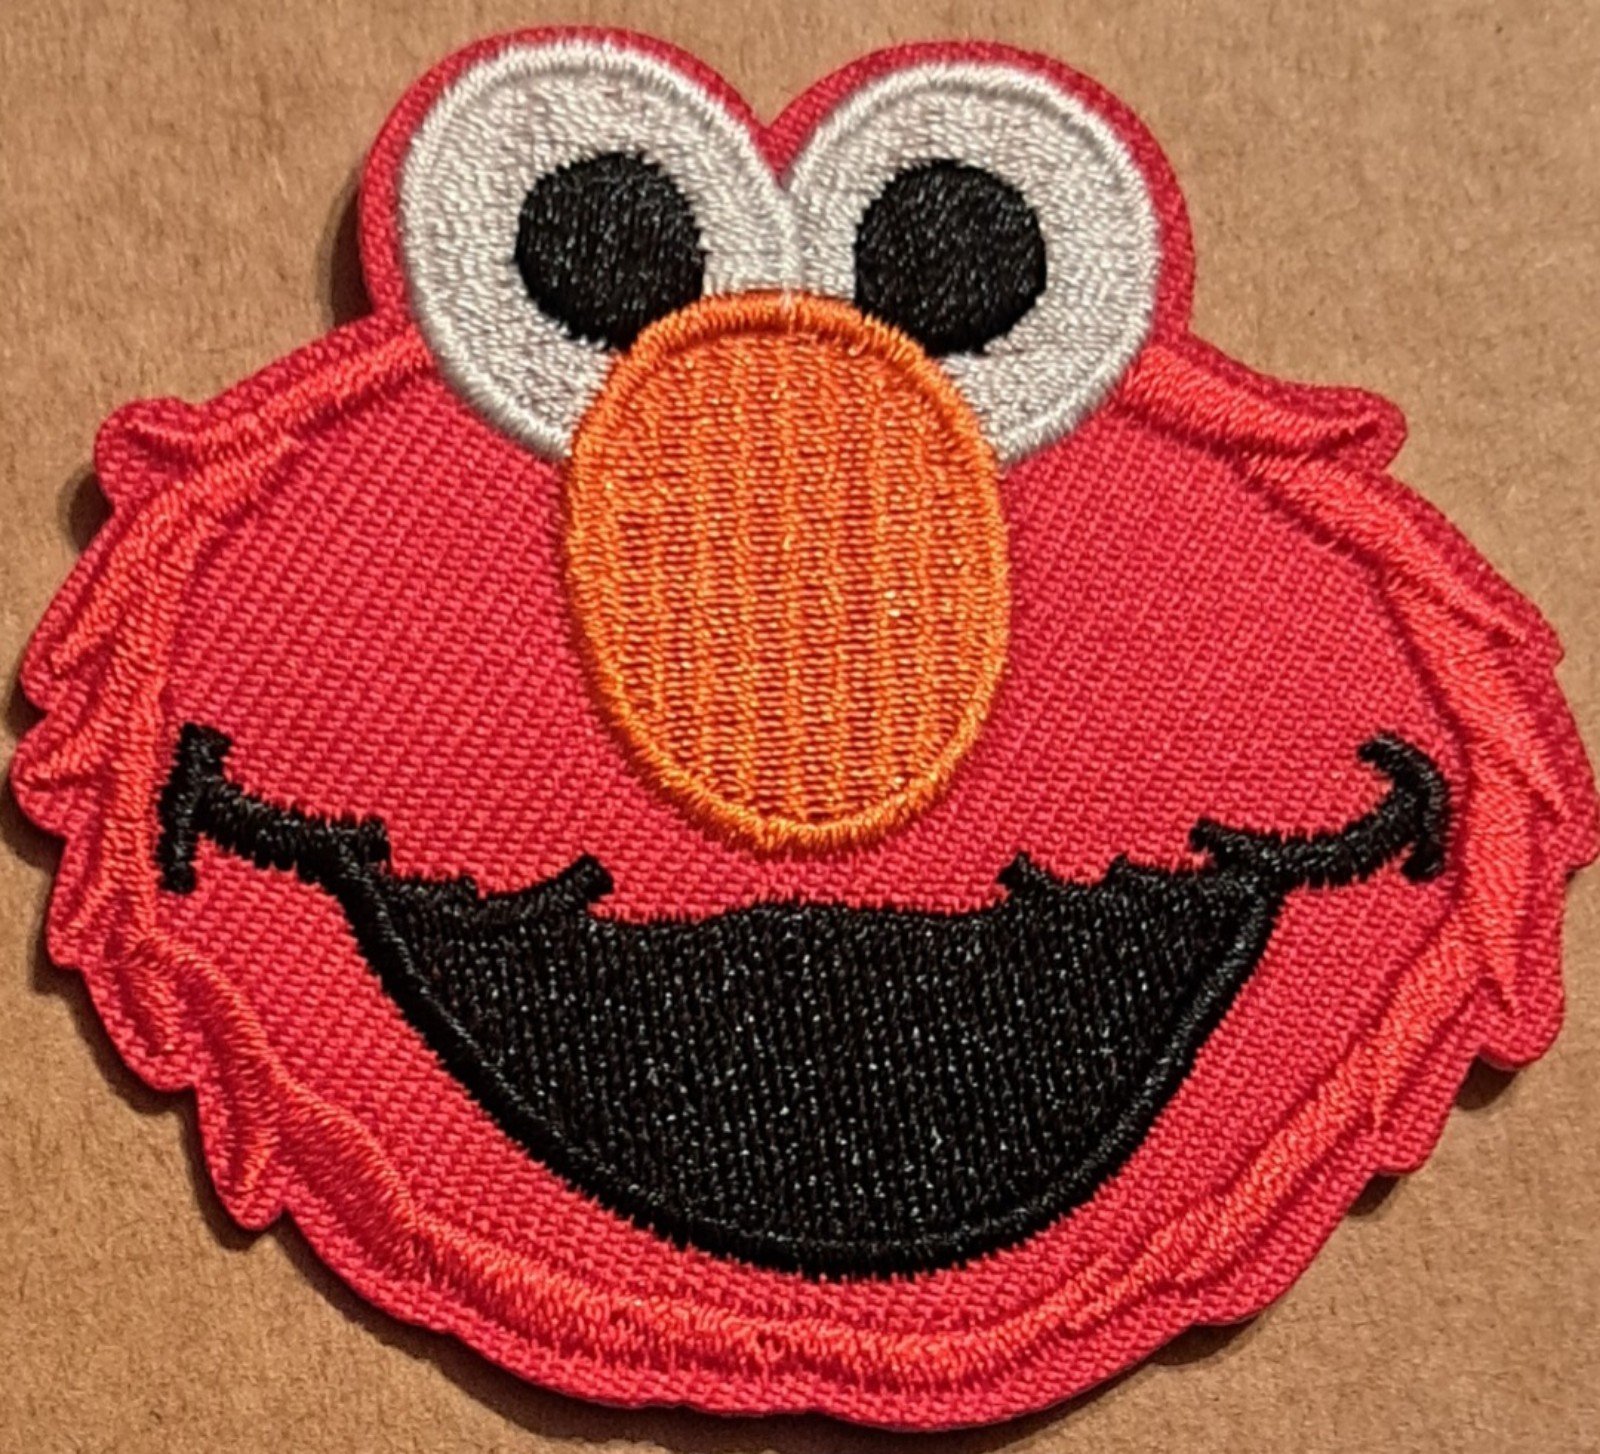 Sesame Street Elmo embroidered Iron on patch 0T6Oyx5n3